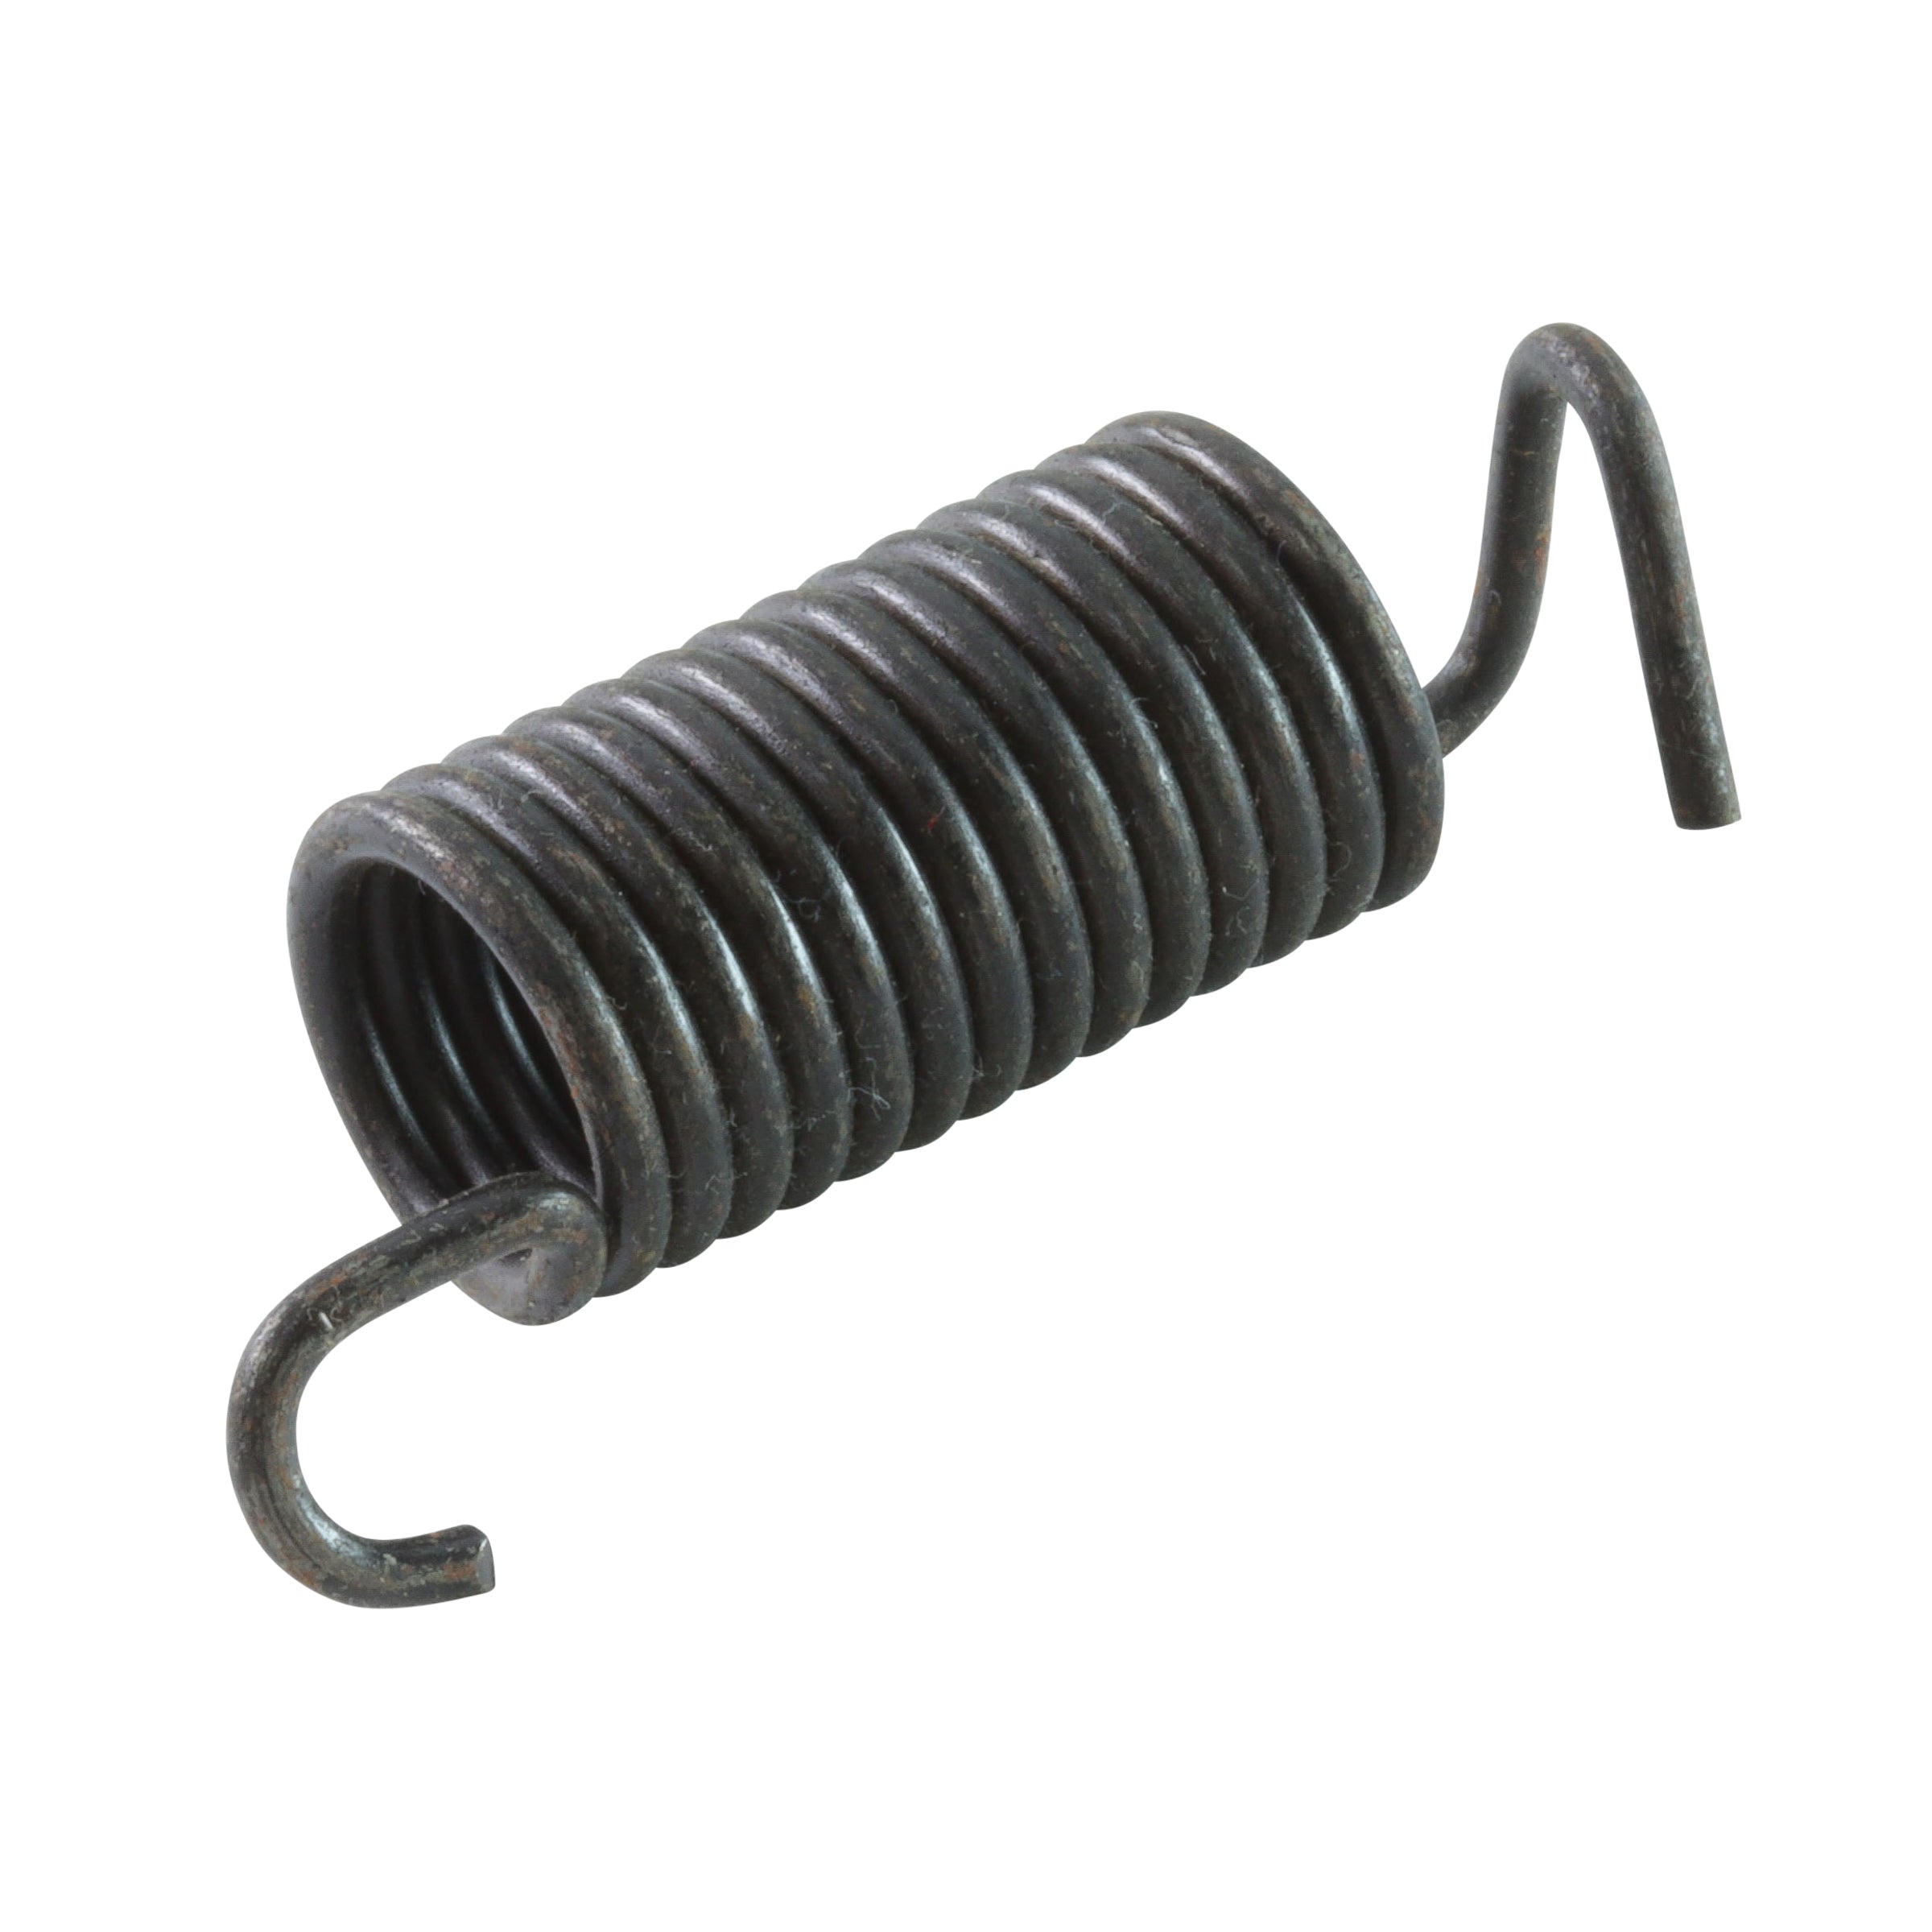 Clutch Pedal Retracting Spring • 1937-38 Ford Passenger & Pickup